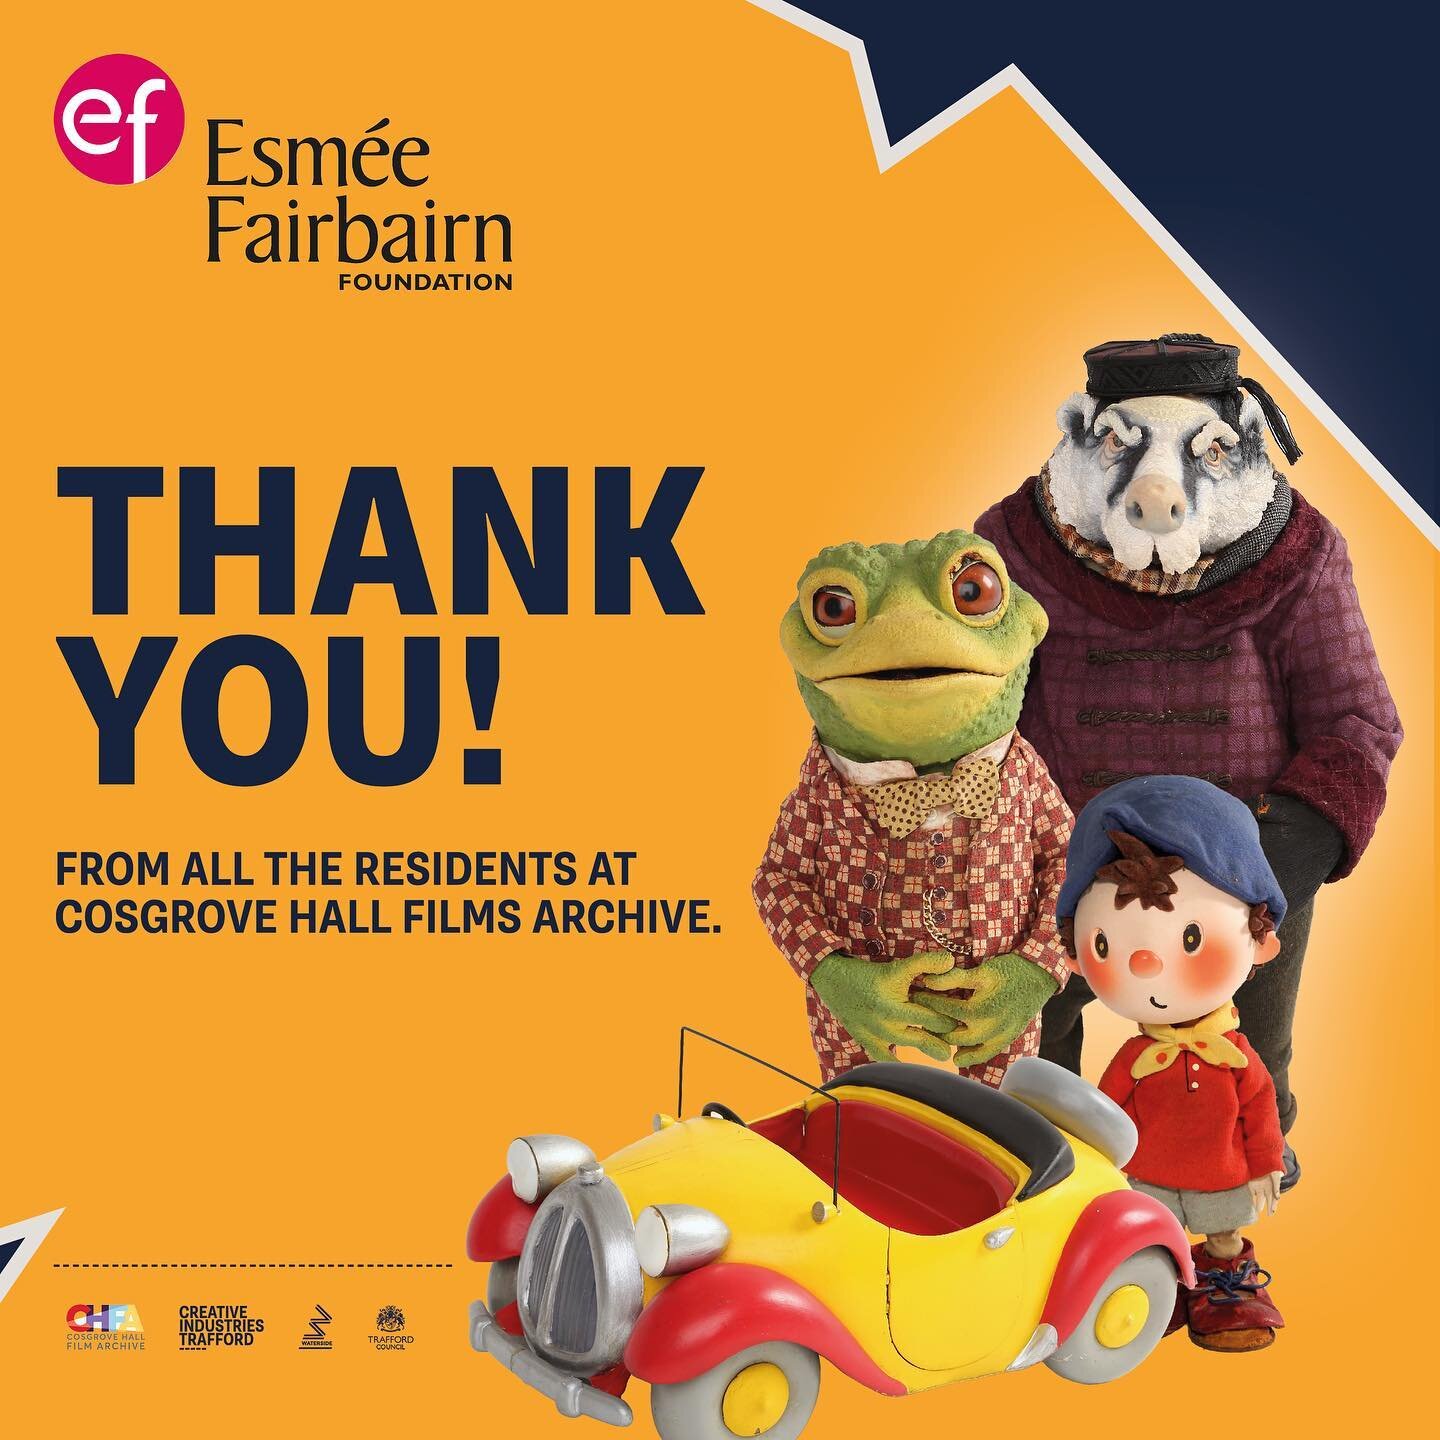 We are so grateful to receive funding from the Esmee Fairbairn Collections Fund through the @museumsassociation for &lsquo;engaging with animation&rsquo; - digitising the @cosgrovehallfilmsarchive and bringing the collection closer to communities acr